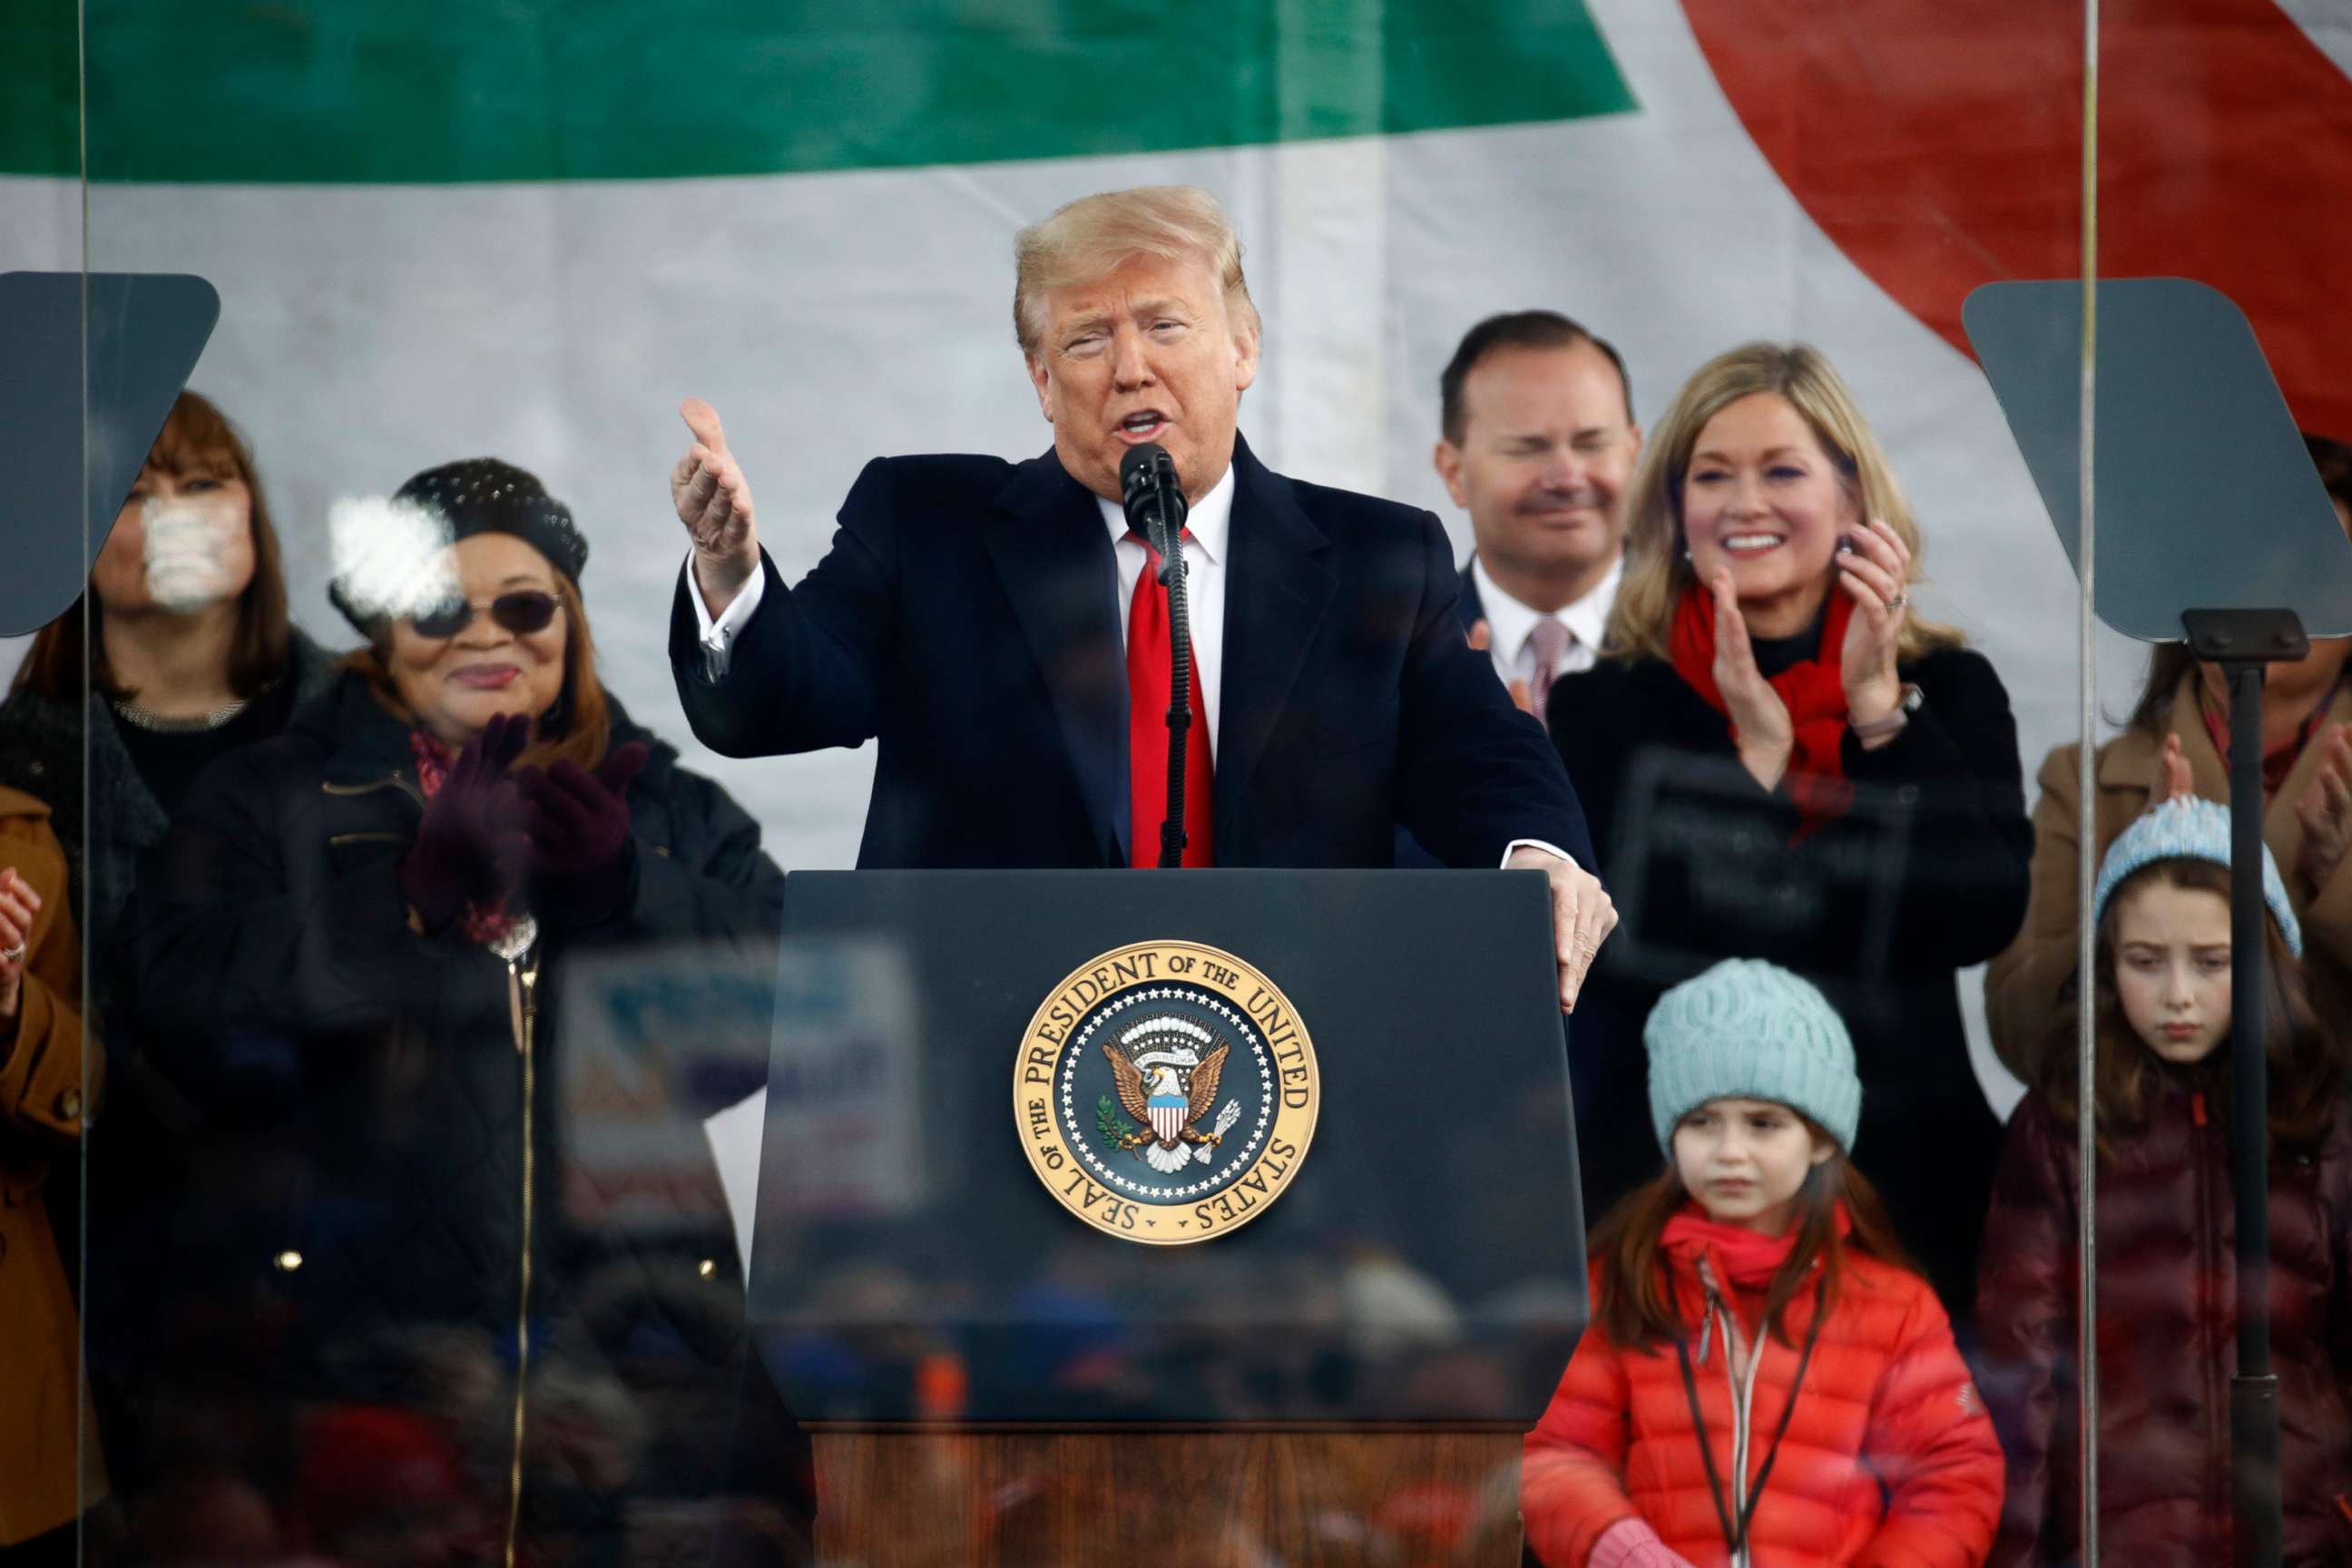 PHOTO: President Donald Trump speaks at a March for Life rally, Jan. 24, 2020, on the National Mall in Washington, D.C.